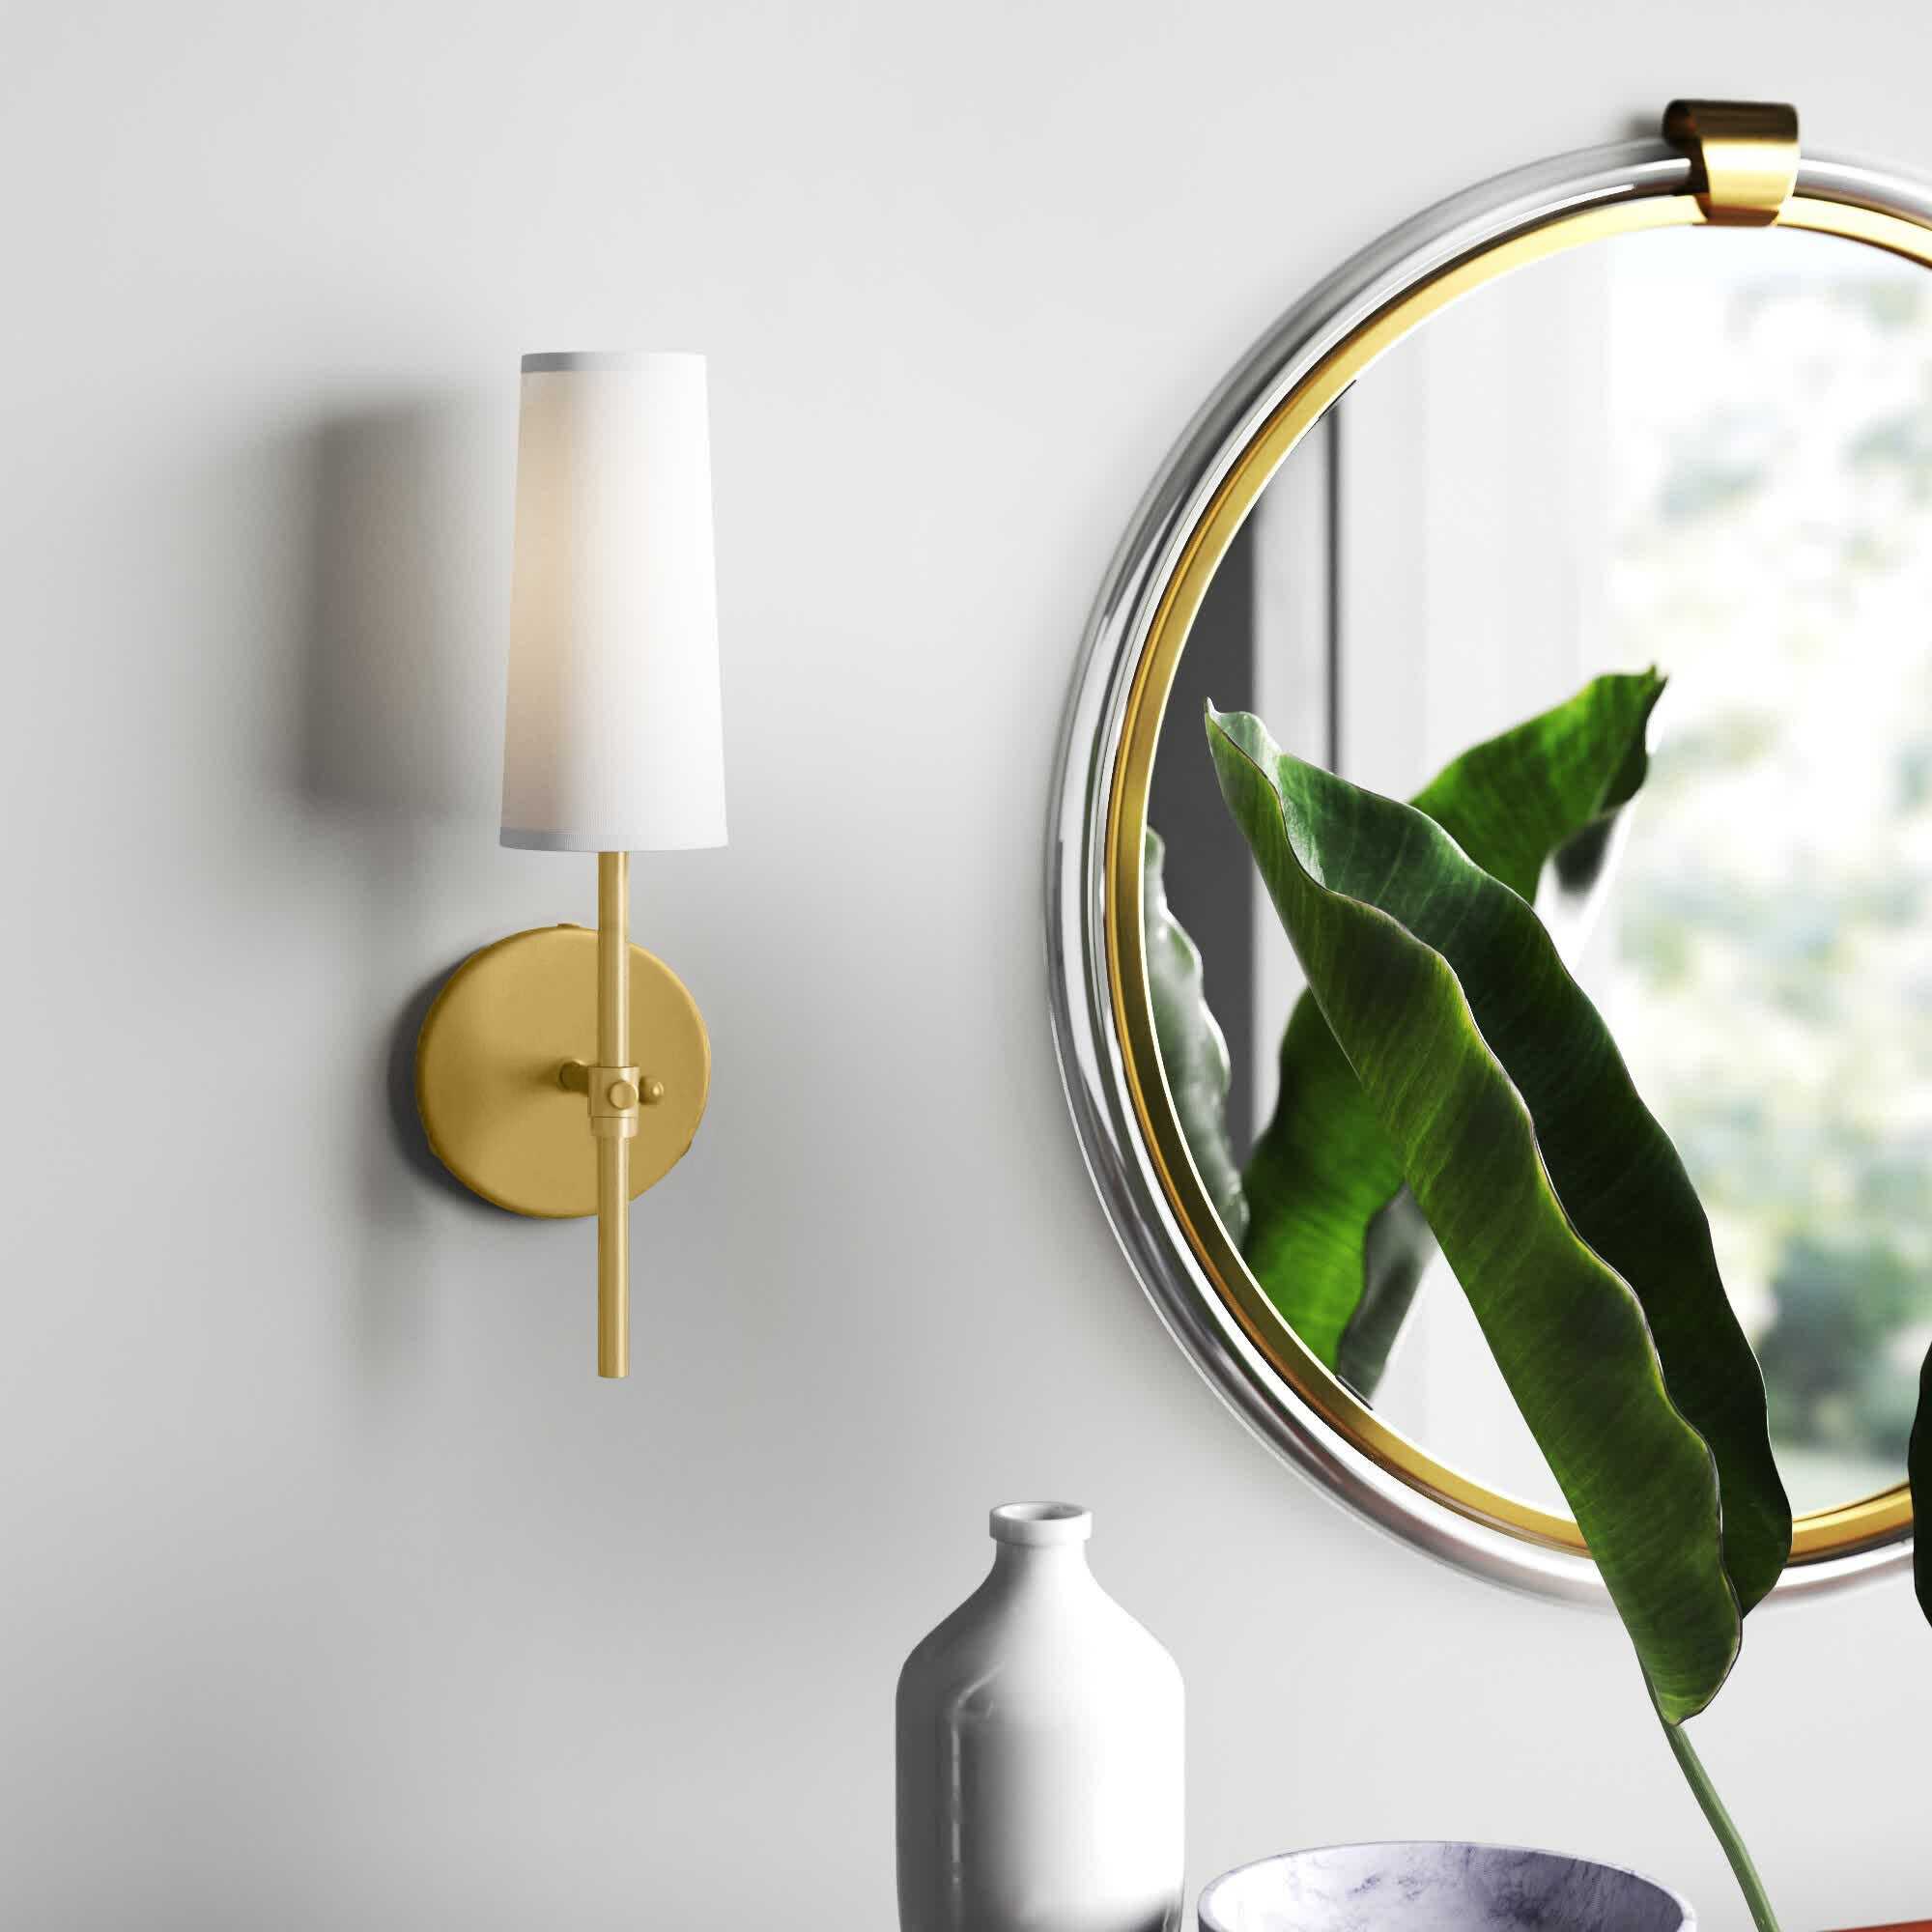 Wayfair | Mid-Century Modern Wall Sconces You'll Love in 2023